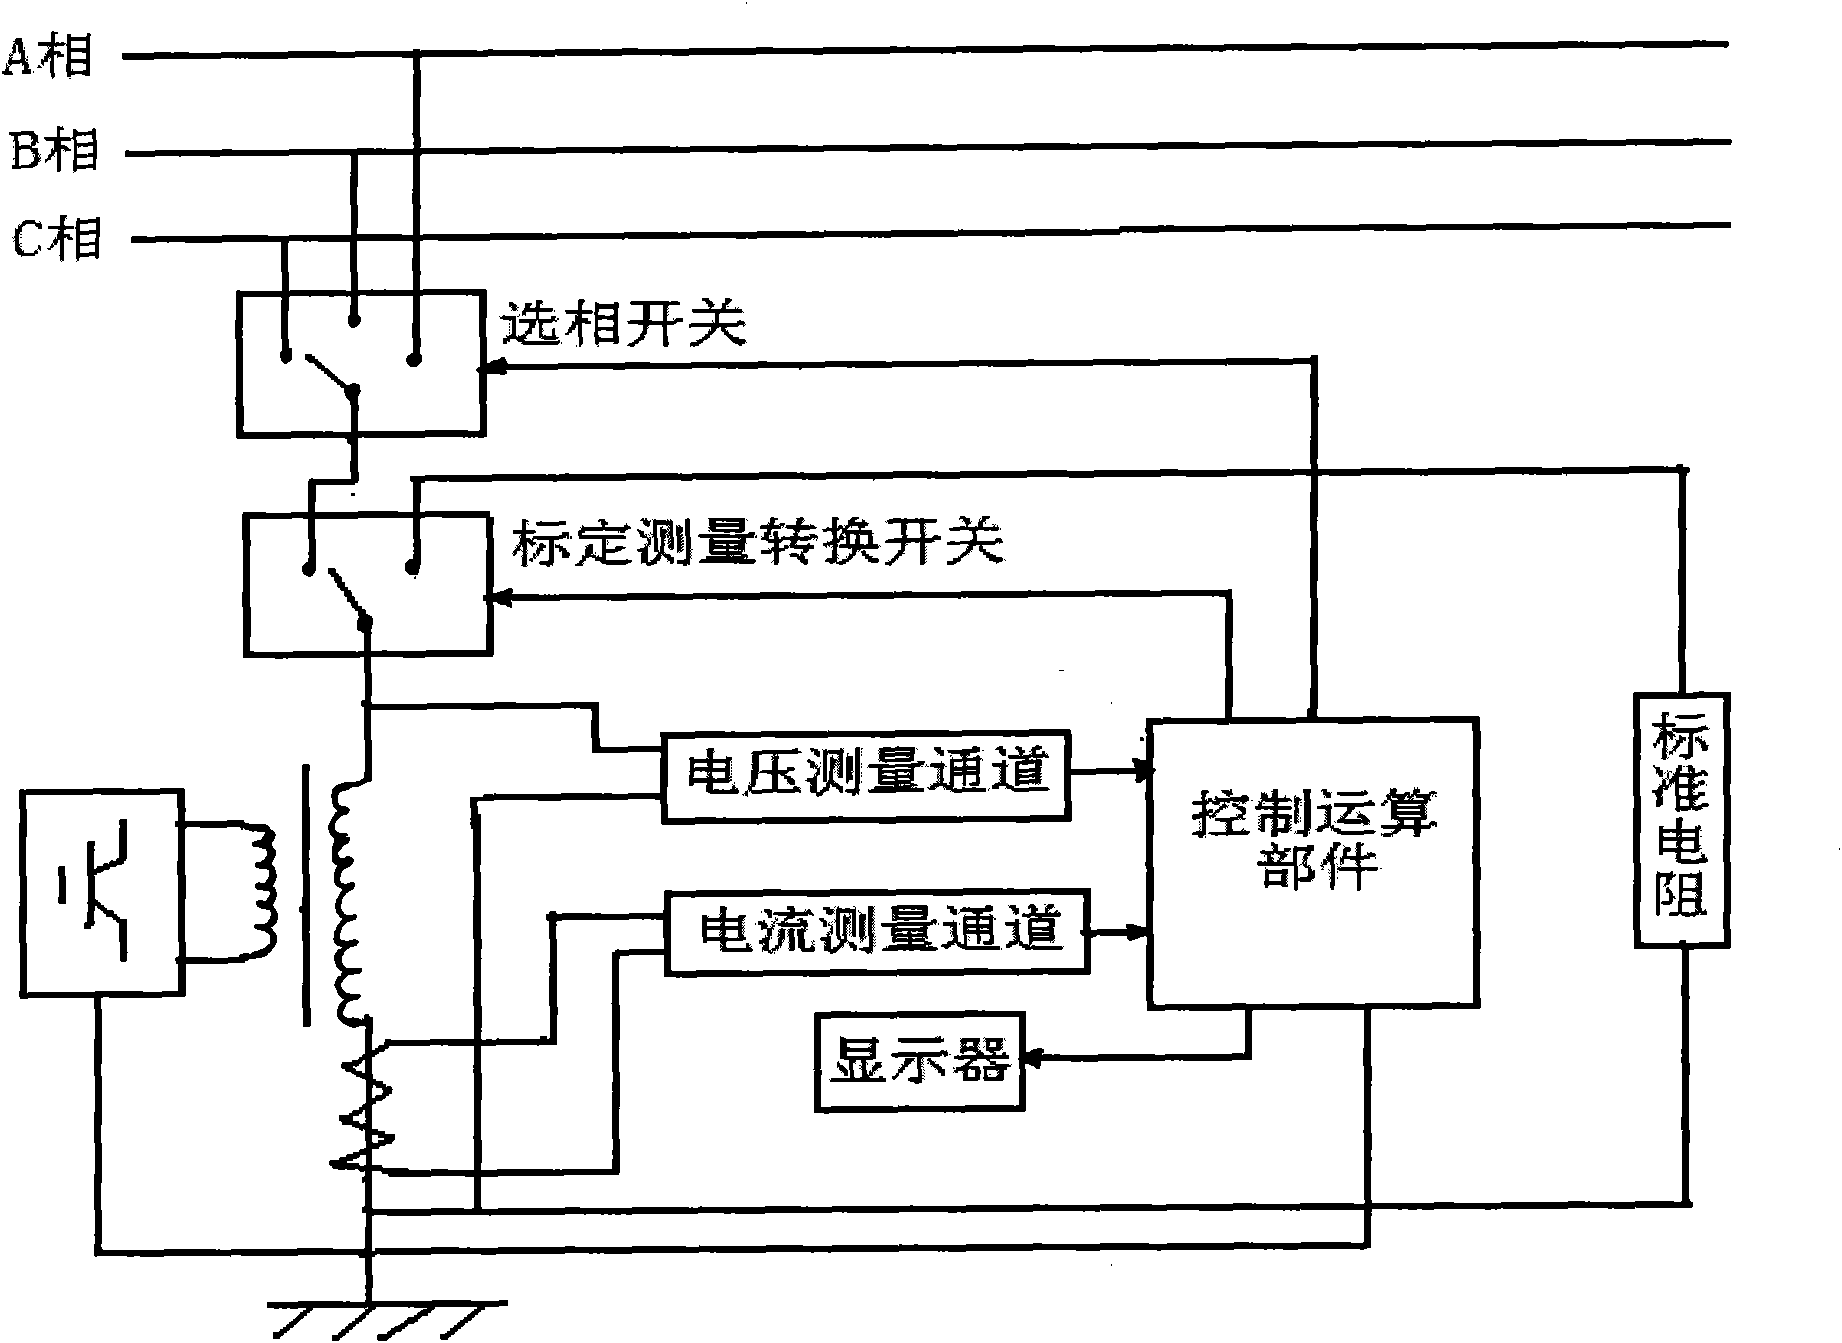 Method and device for locating single-phase grounding fault of low-current grounding system